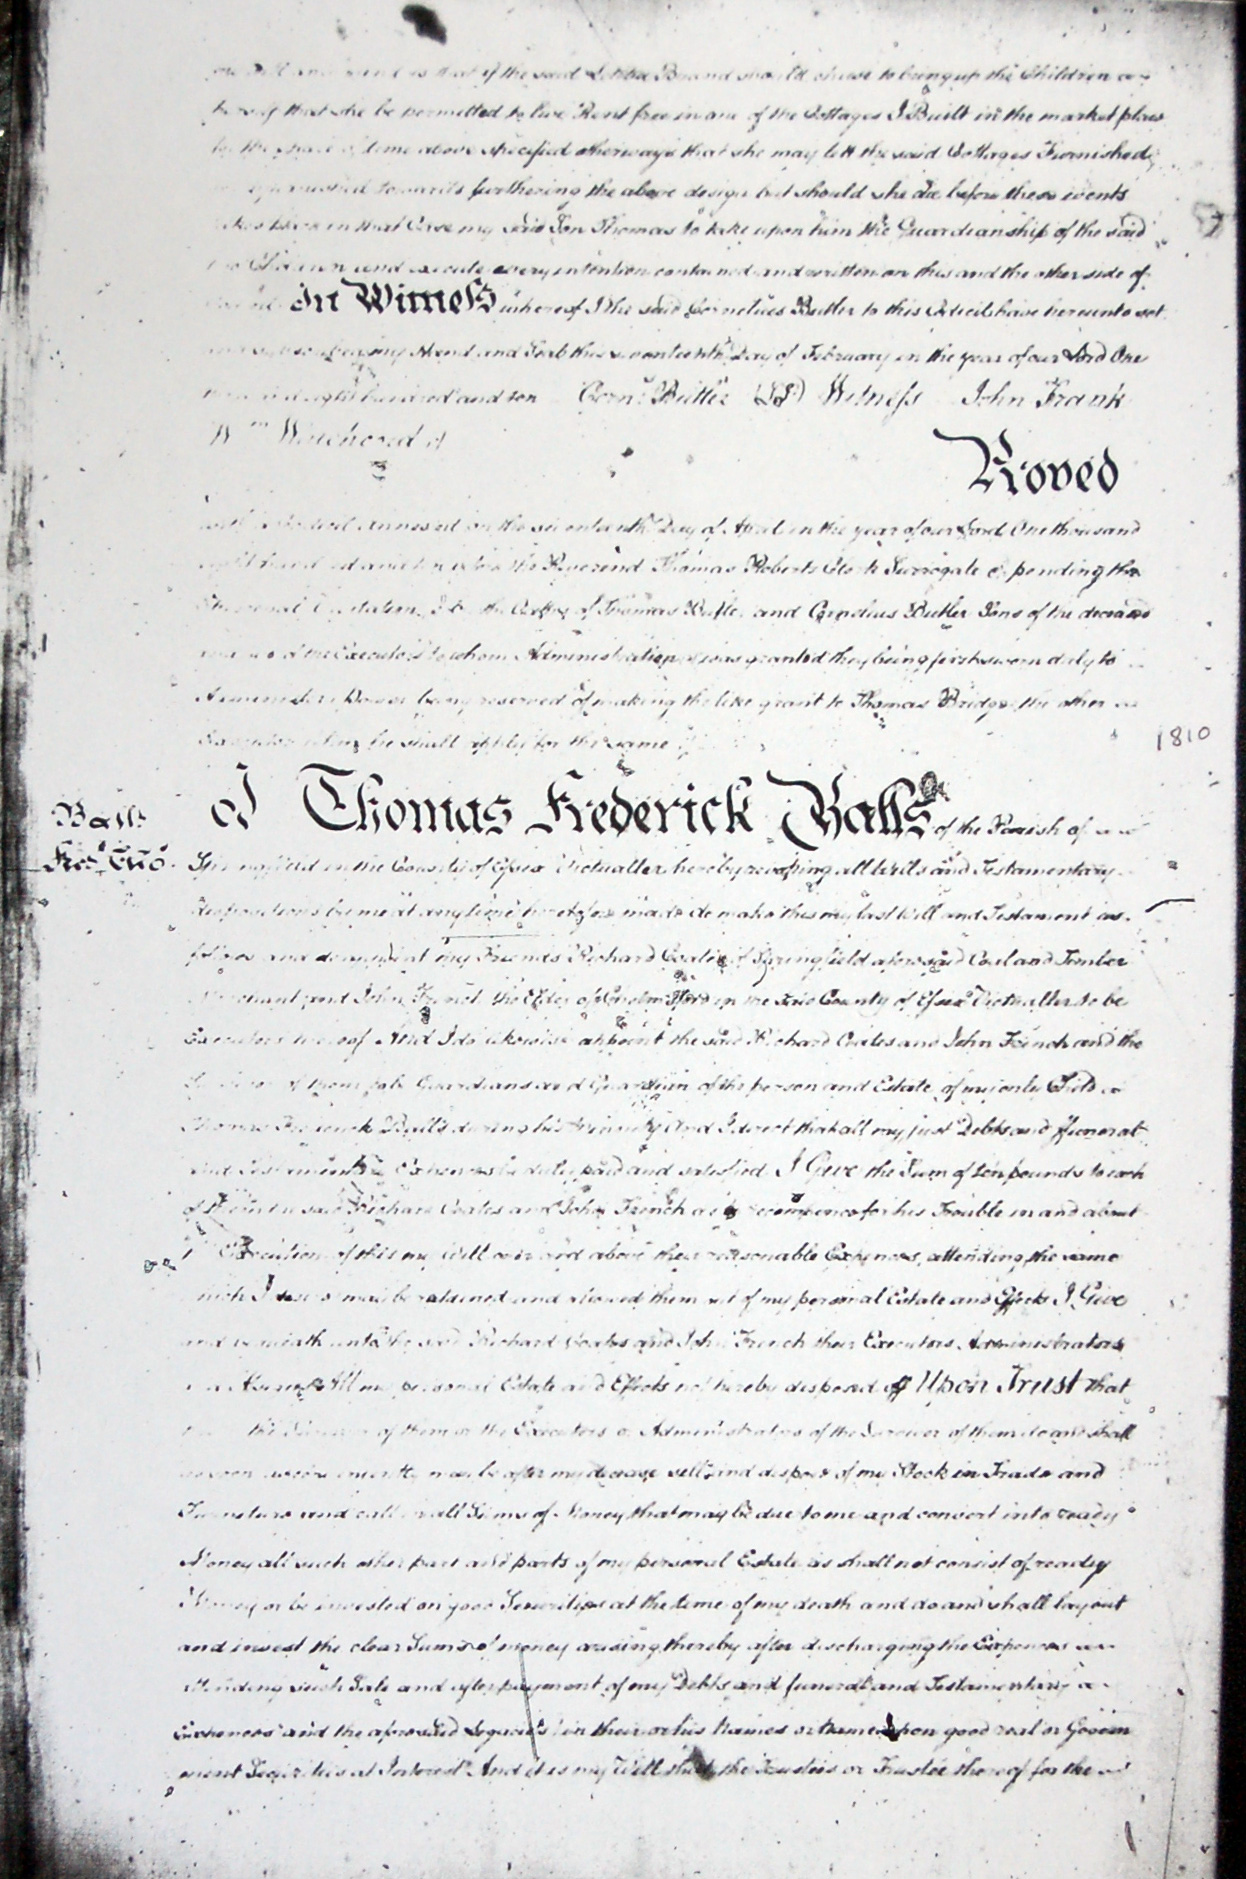 The will of Thomas Frederick Balls dated 1810, page 1 in which it is revealed he is a victualler of Springfield (like his father) and has an only child also named Thomas Frederick